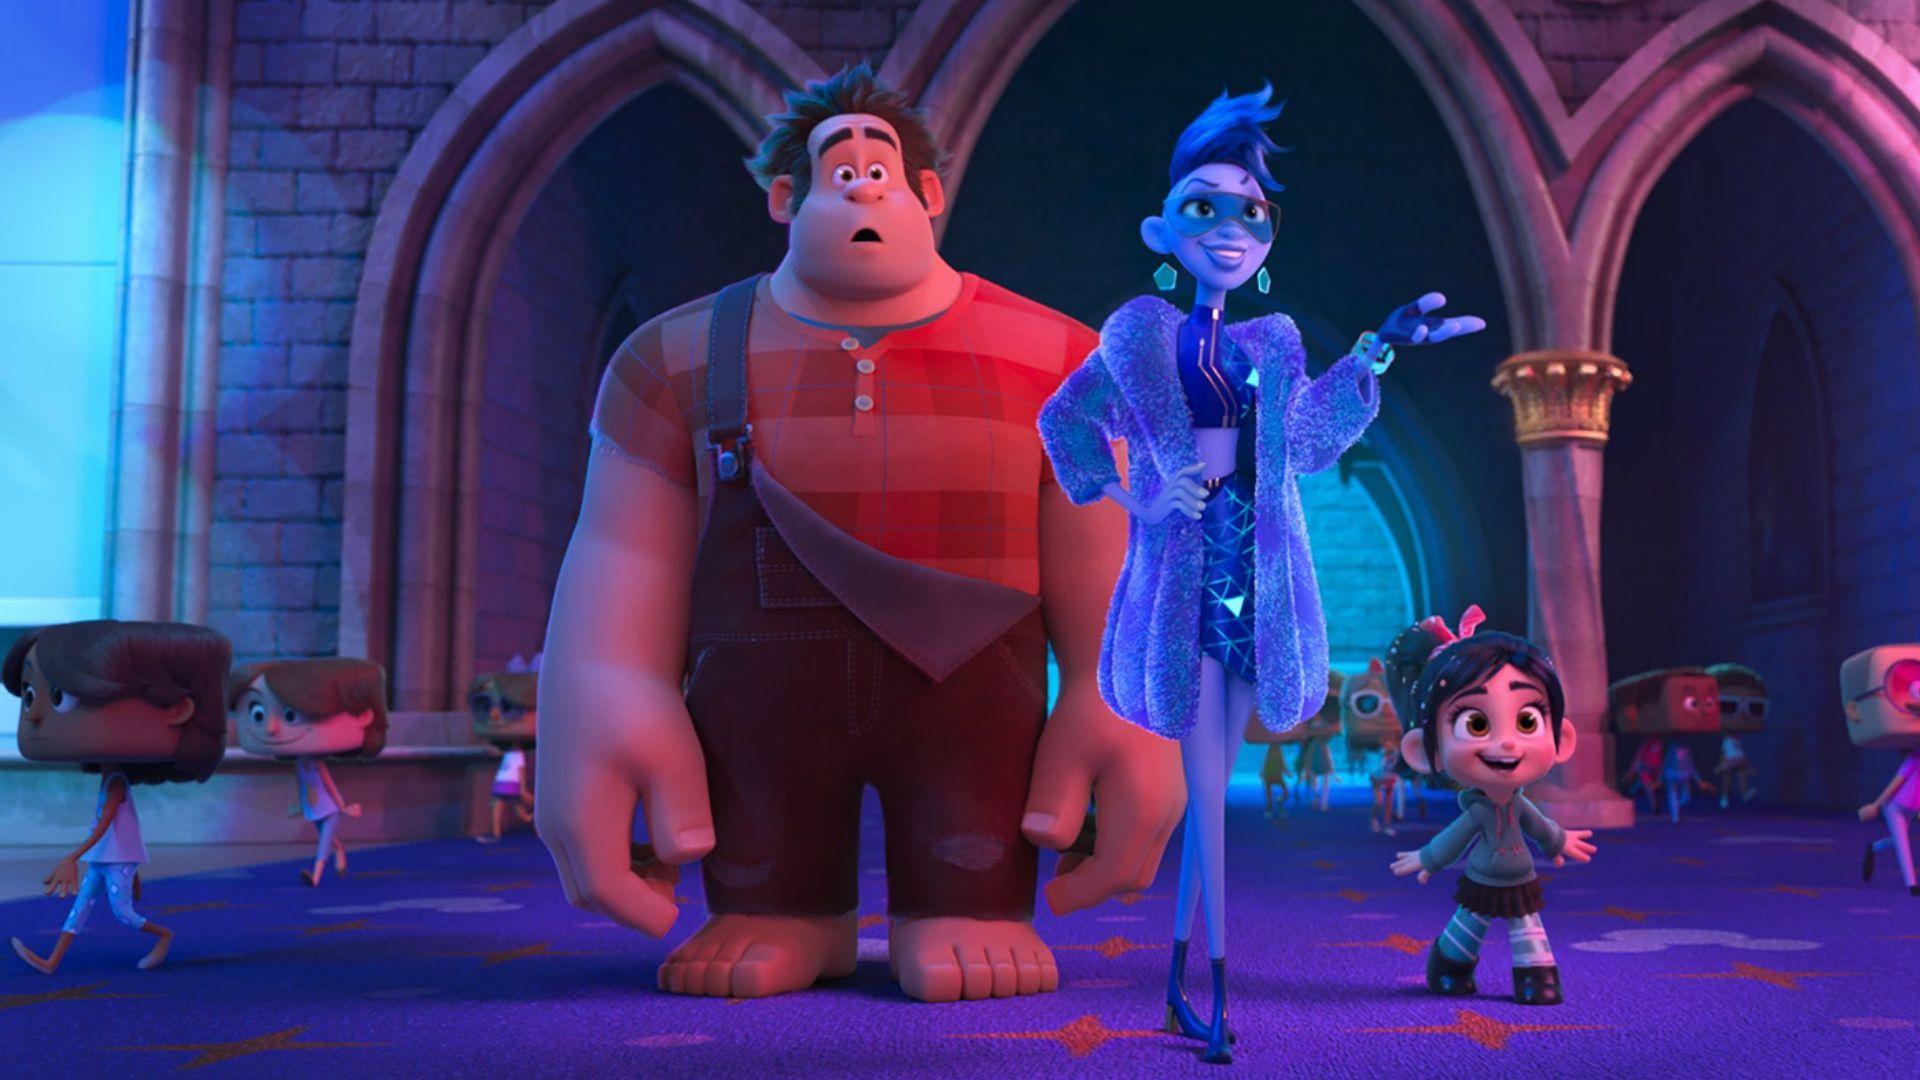 Fan Expo 2018: What We Learned About Ralph Breaks The Internet